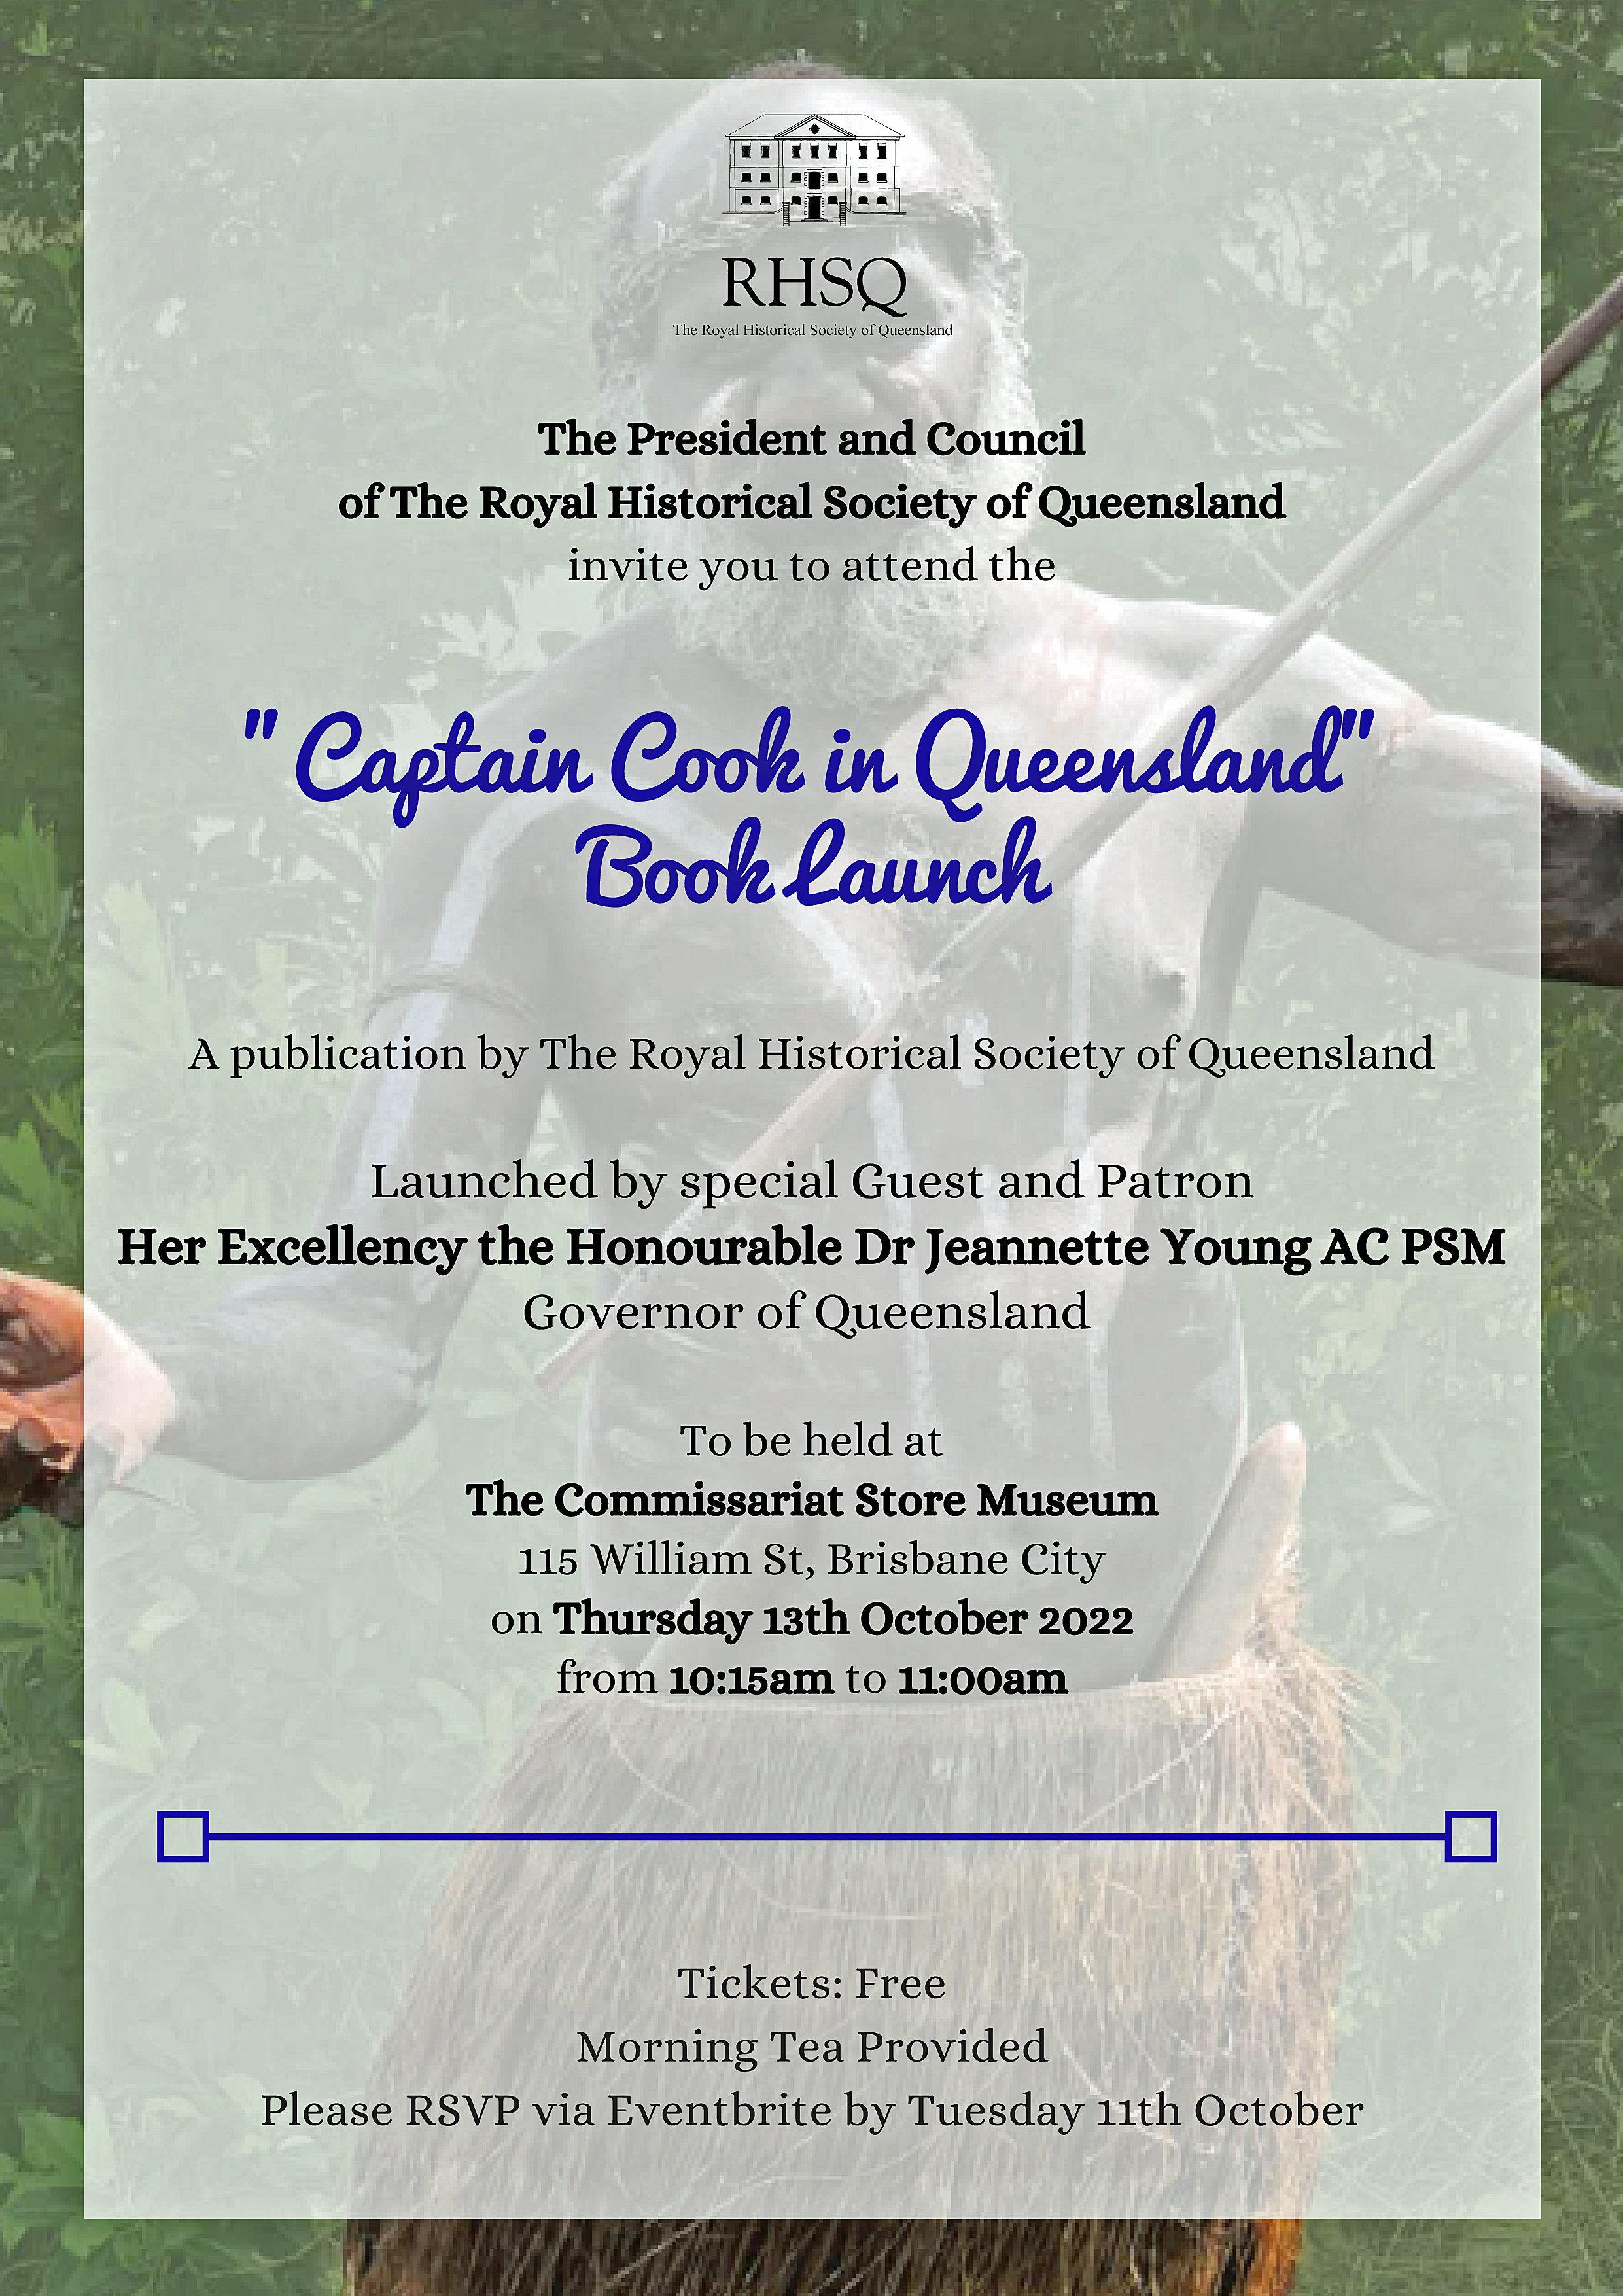 2022_10_13 Launch of Book - Capt Cook in Qld (1).jpg